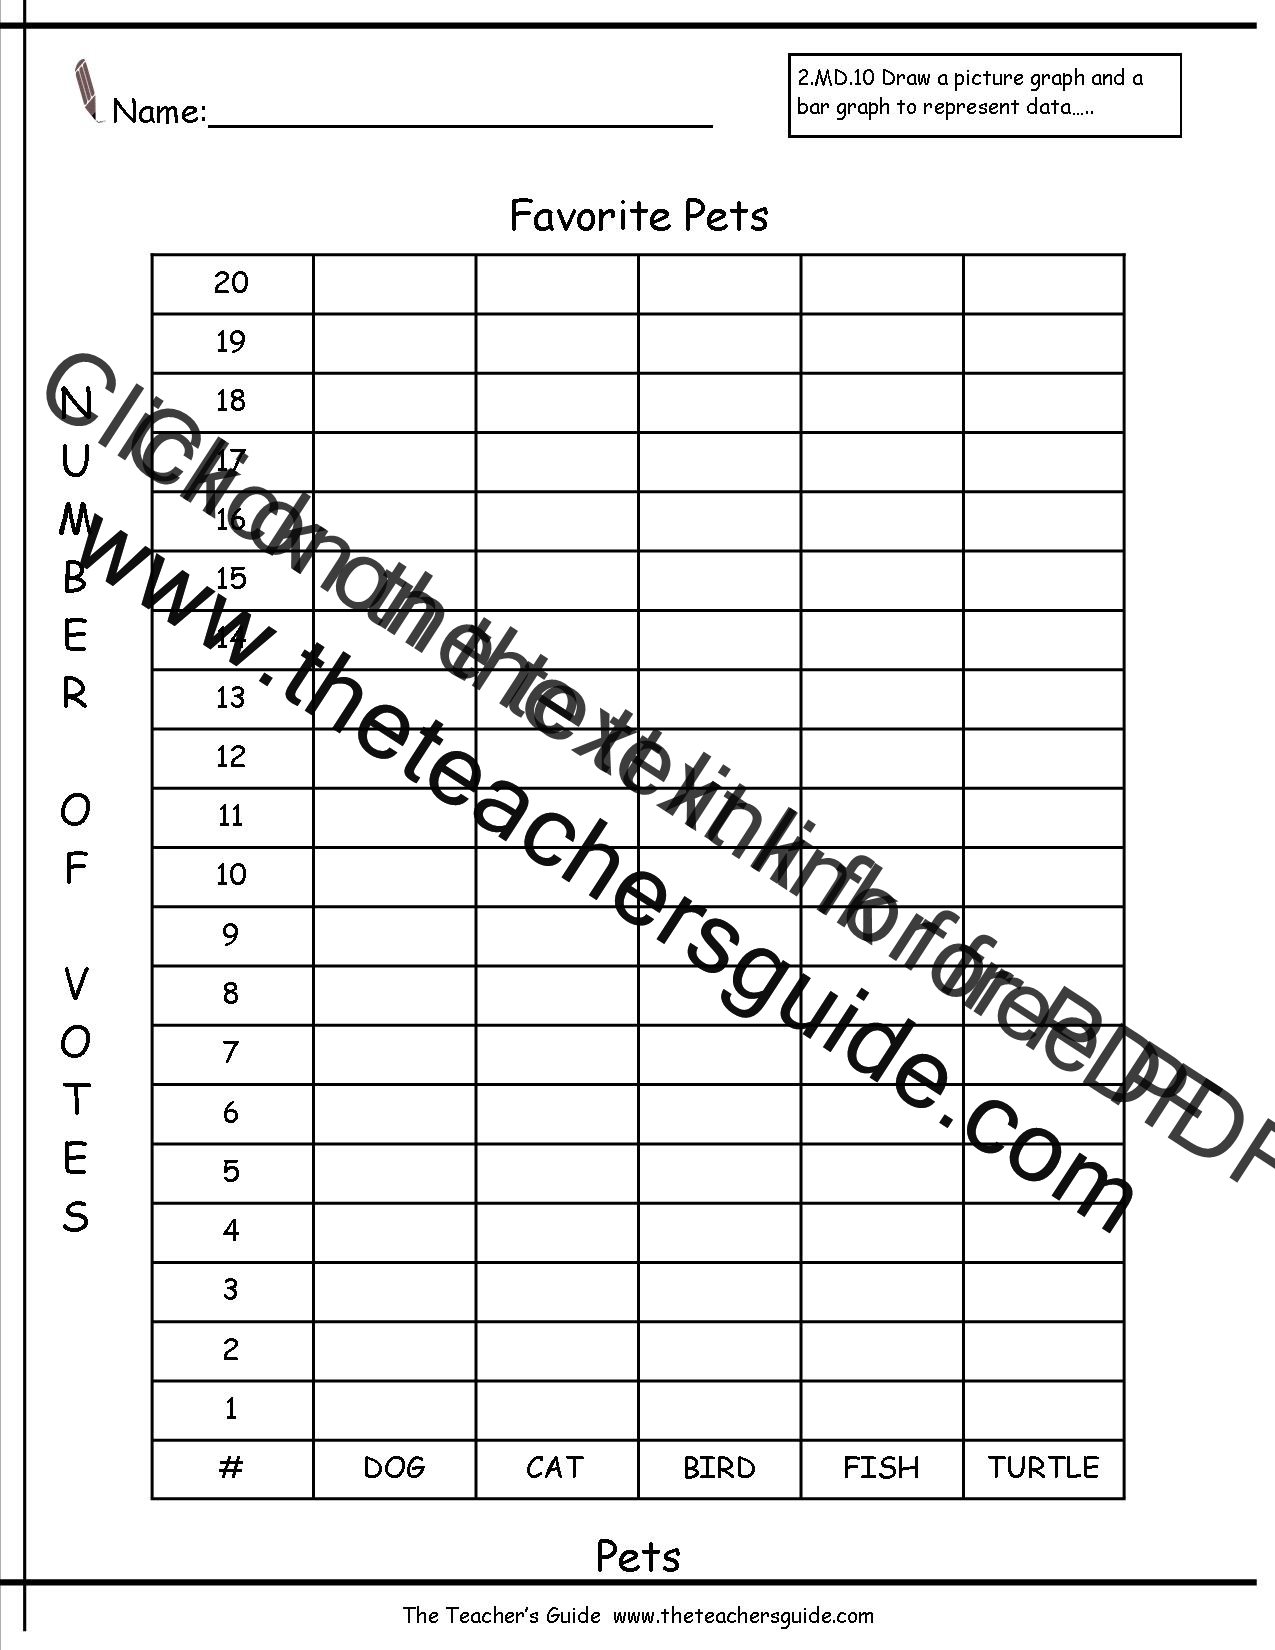 Reading and Creating Bar Graphs Worksheets from The Teacher's Guide1275 x 1650